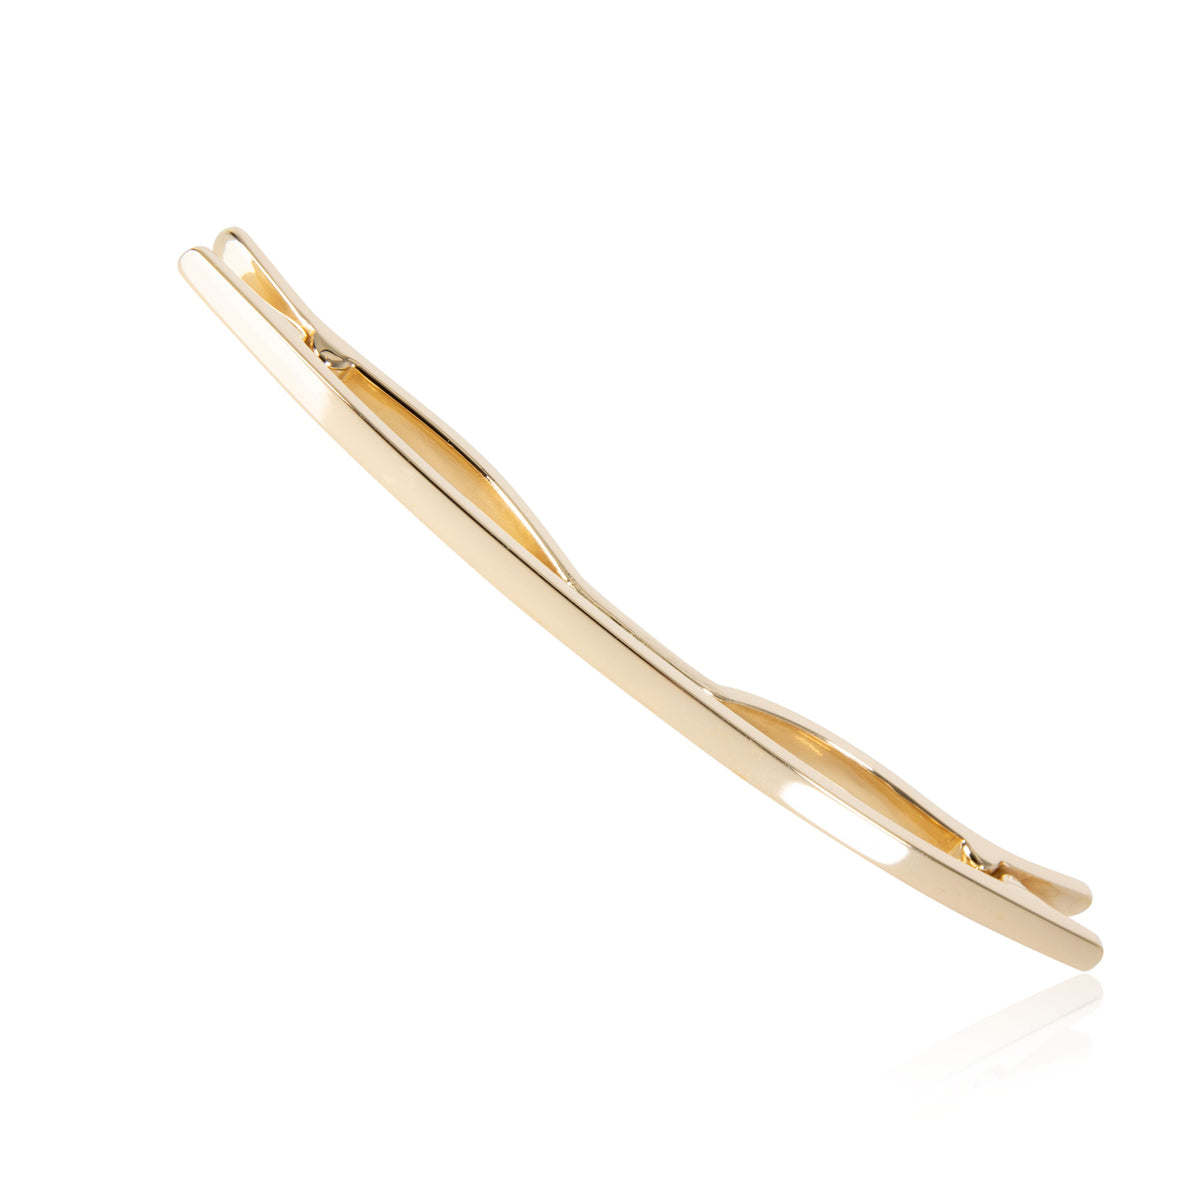 Tiffany & Co. Vintage Scarf Clip in 14K Yellow Gold